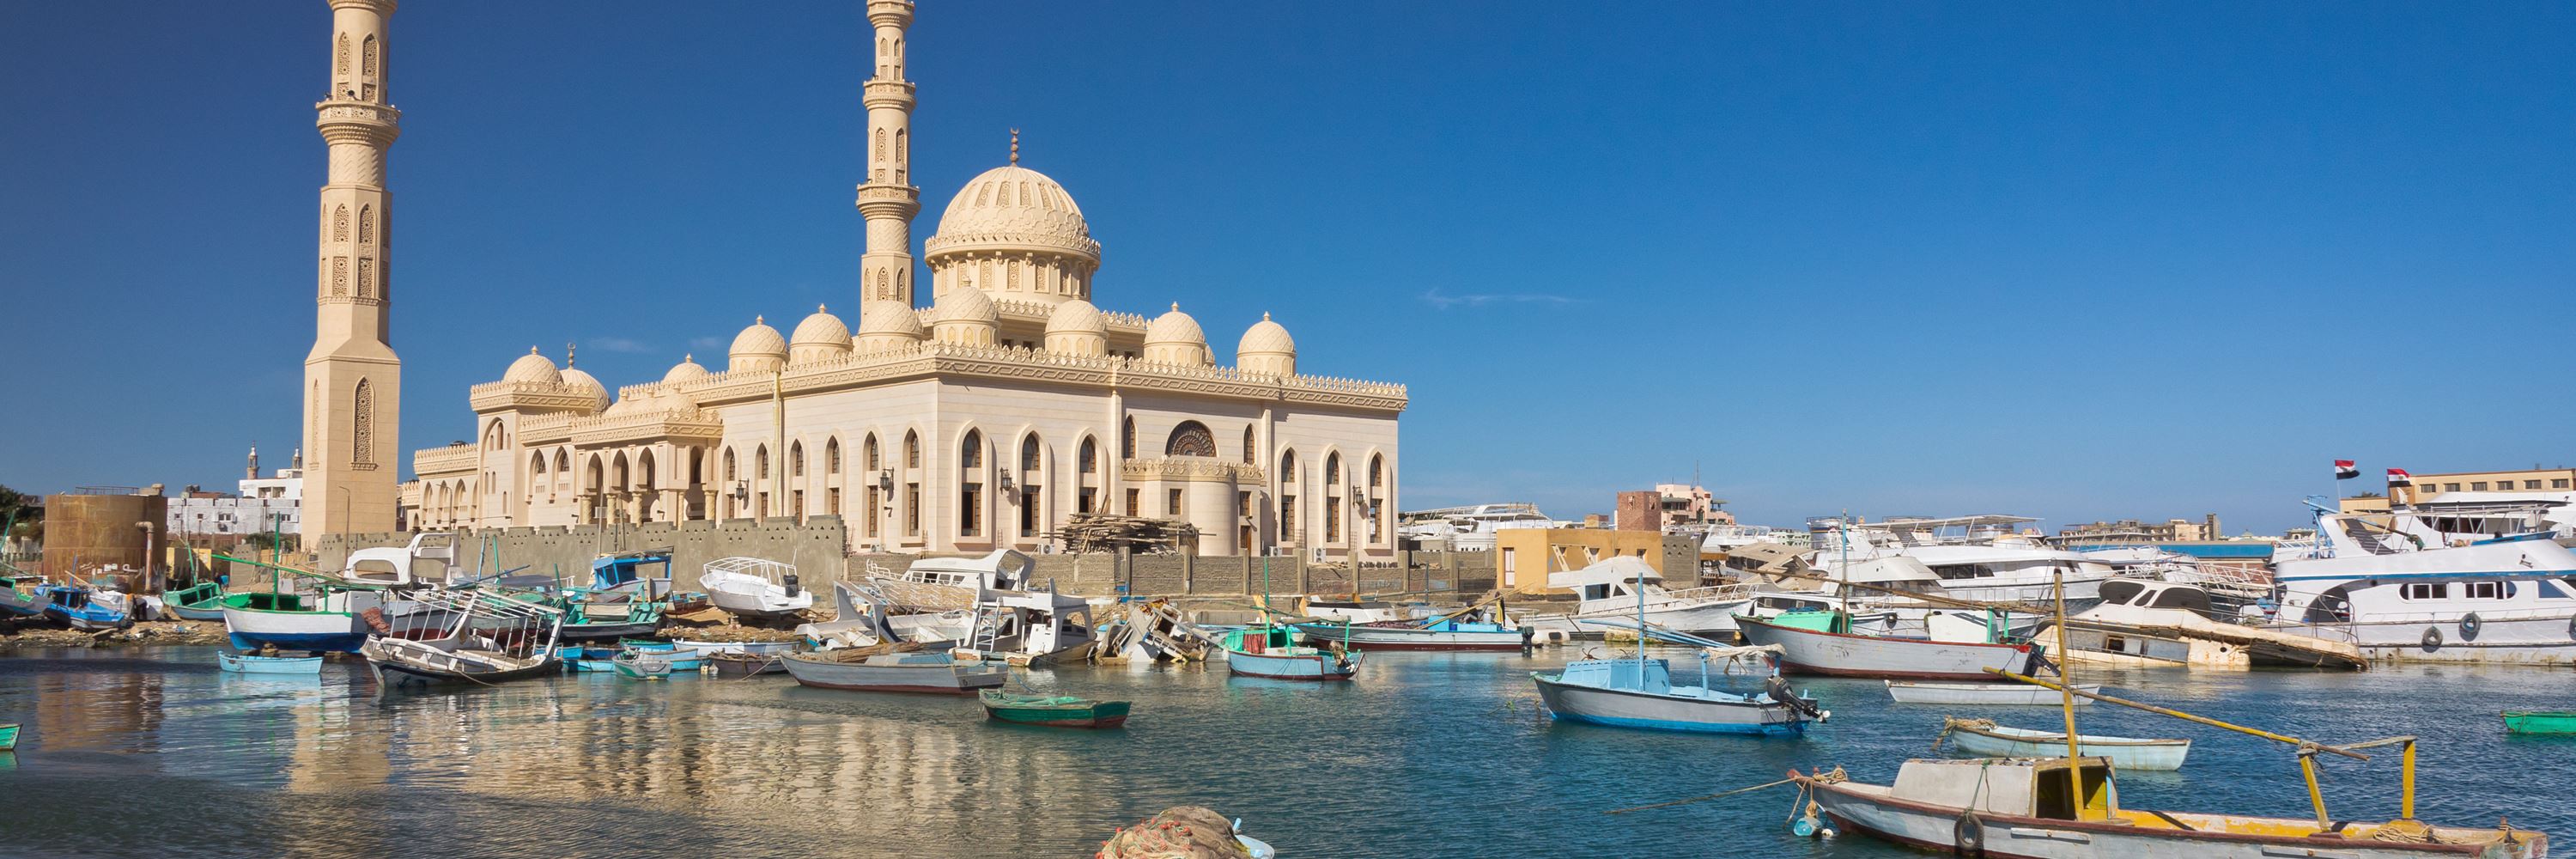 https://media.audleytravel.com/-/media/images/home/north-africa-and-the-middle-east/egypt/places/175239404_hurghada_mosque_3000x1000.jpg